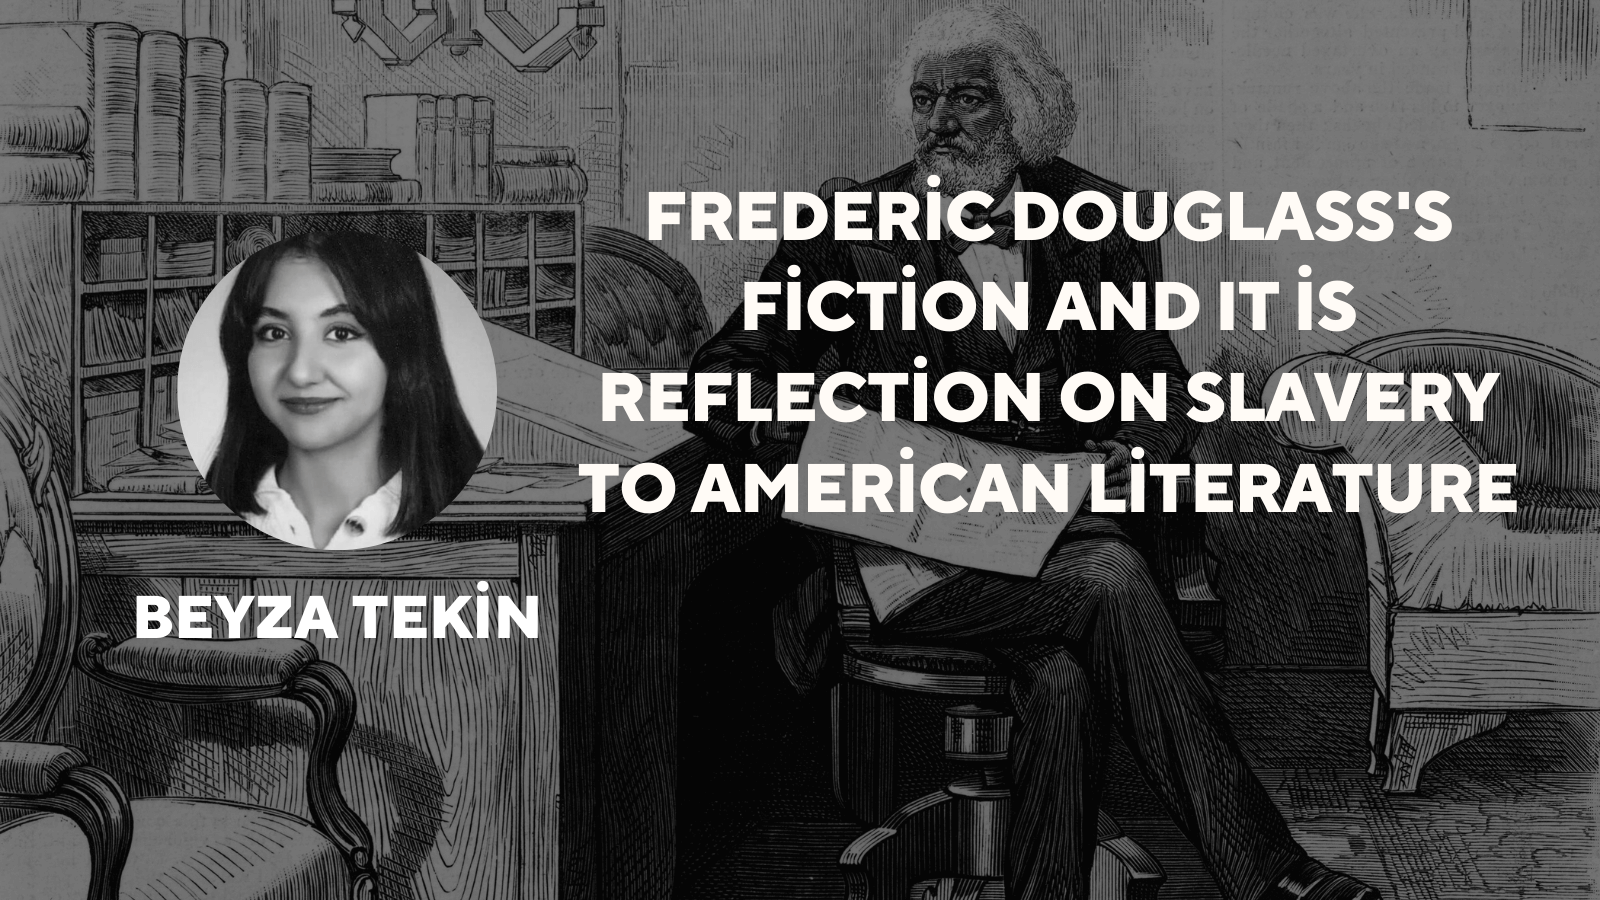 Frederic Douglass's Fiction and It is Reflection on Slavery to American Literature